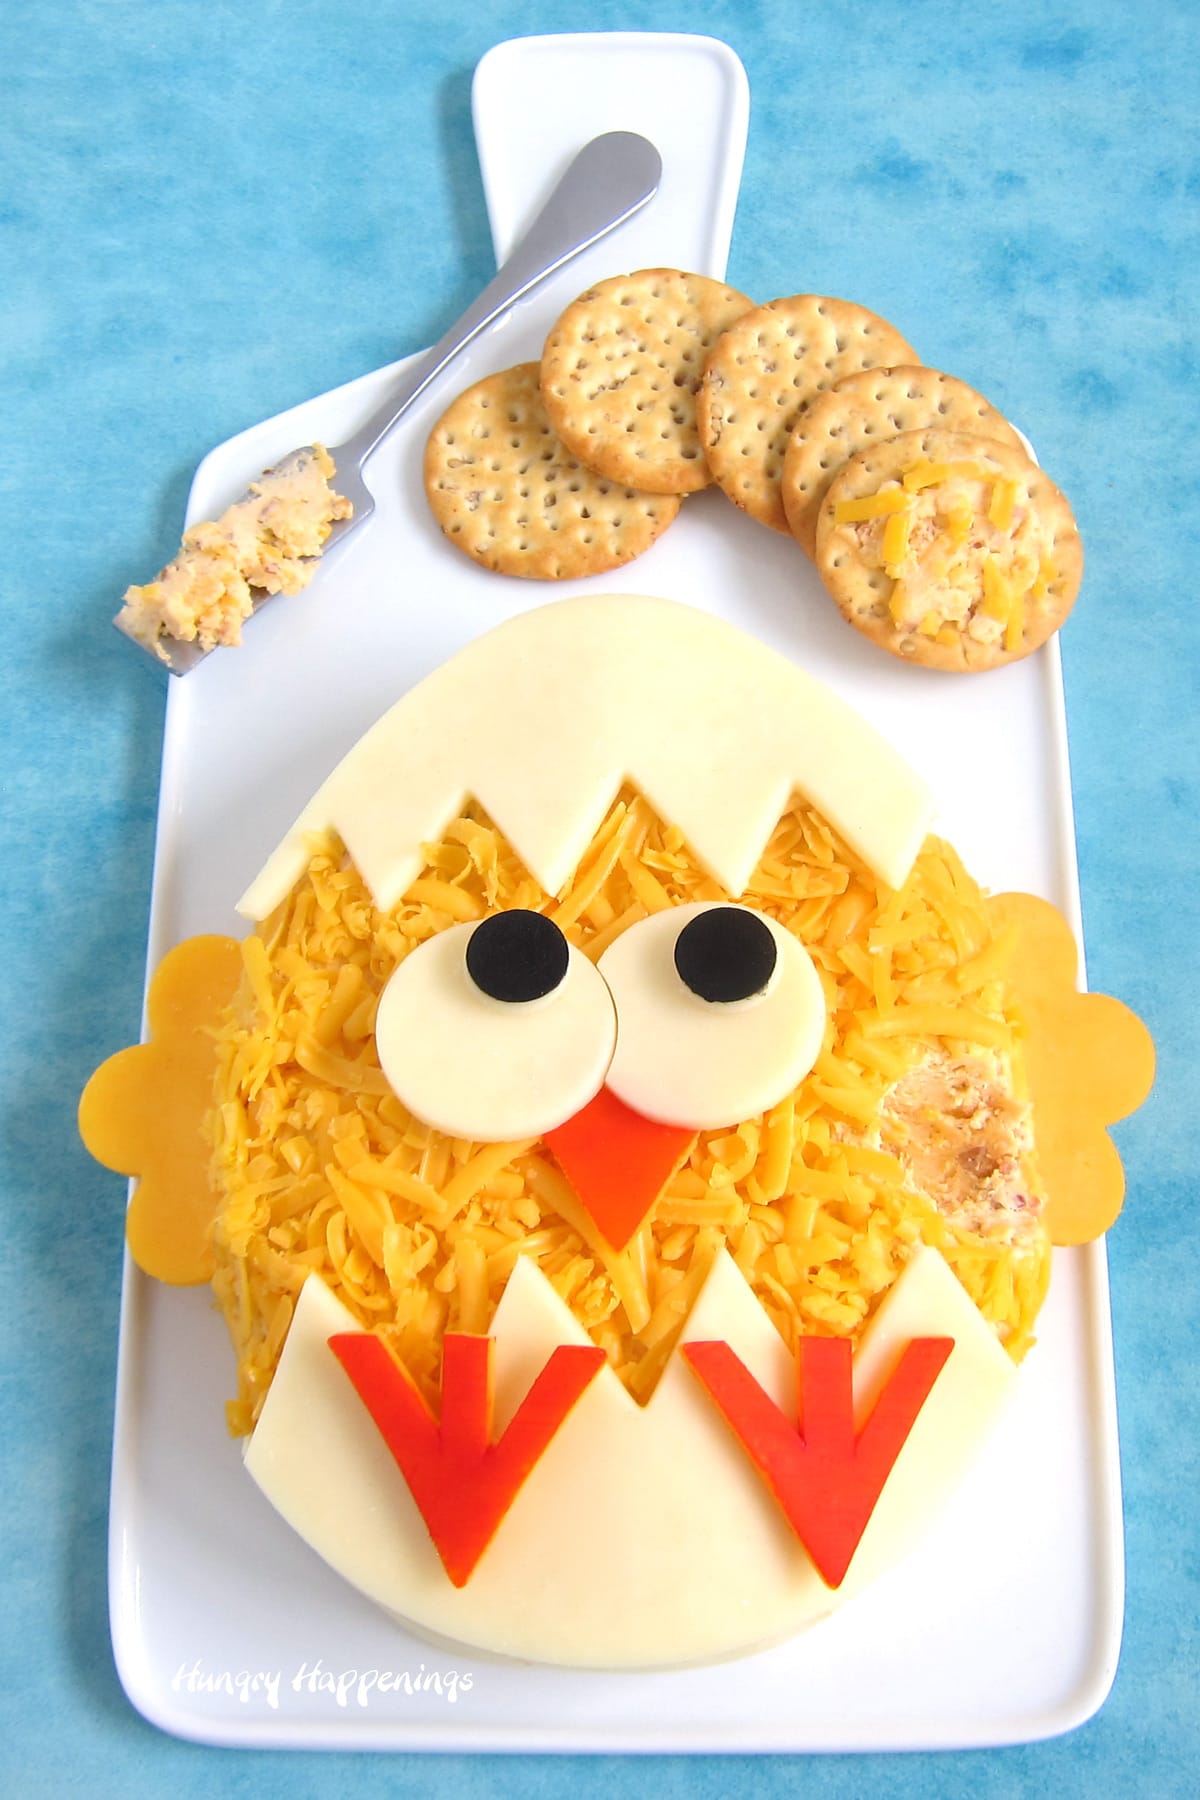 Hatching chick cheese ball for Easter served with crackers.